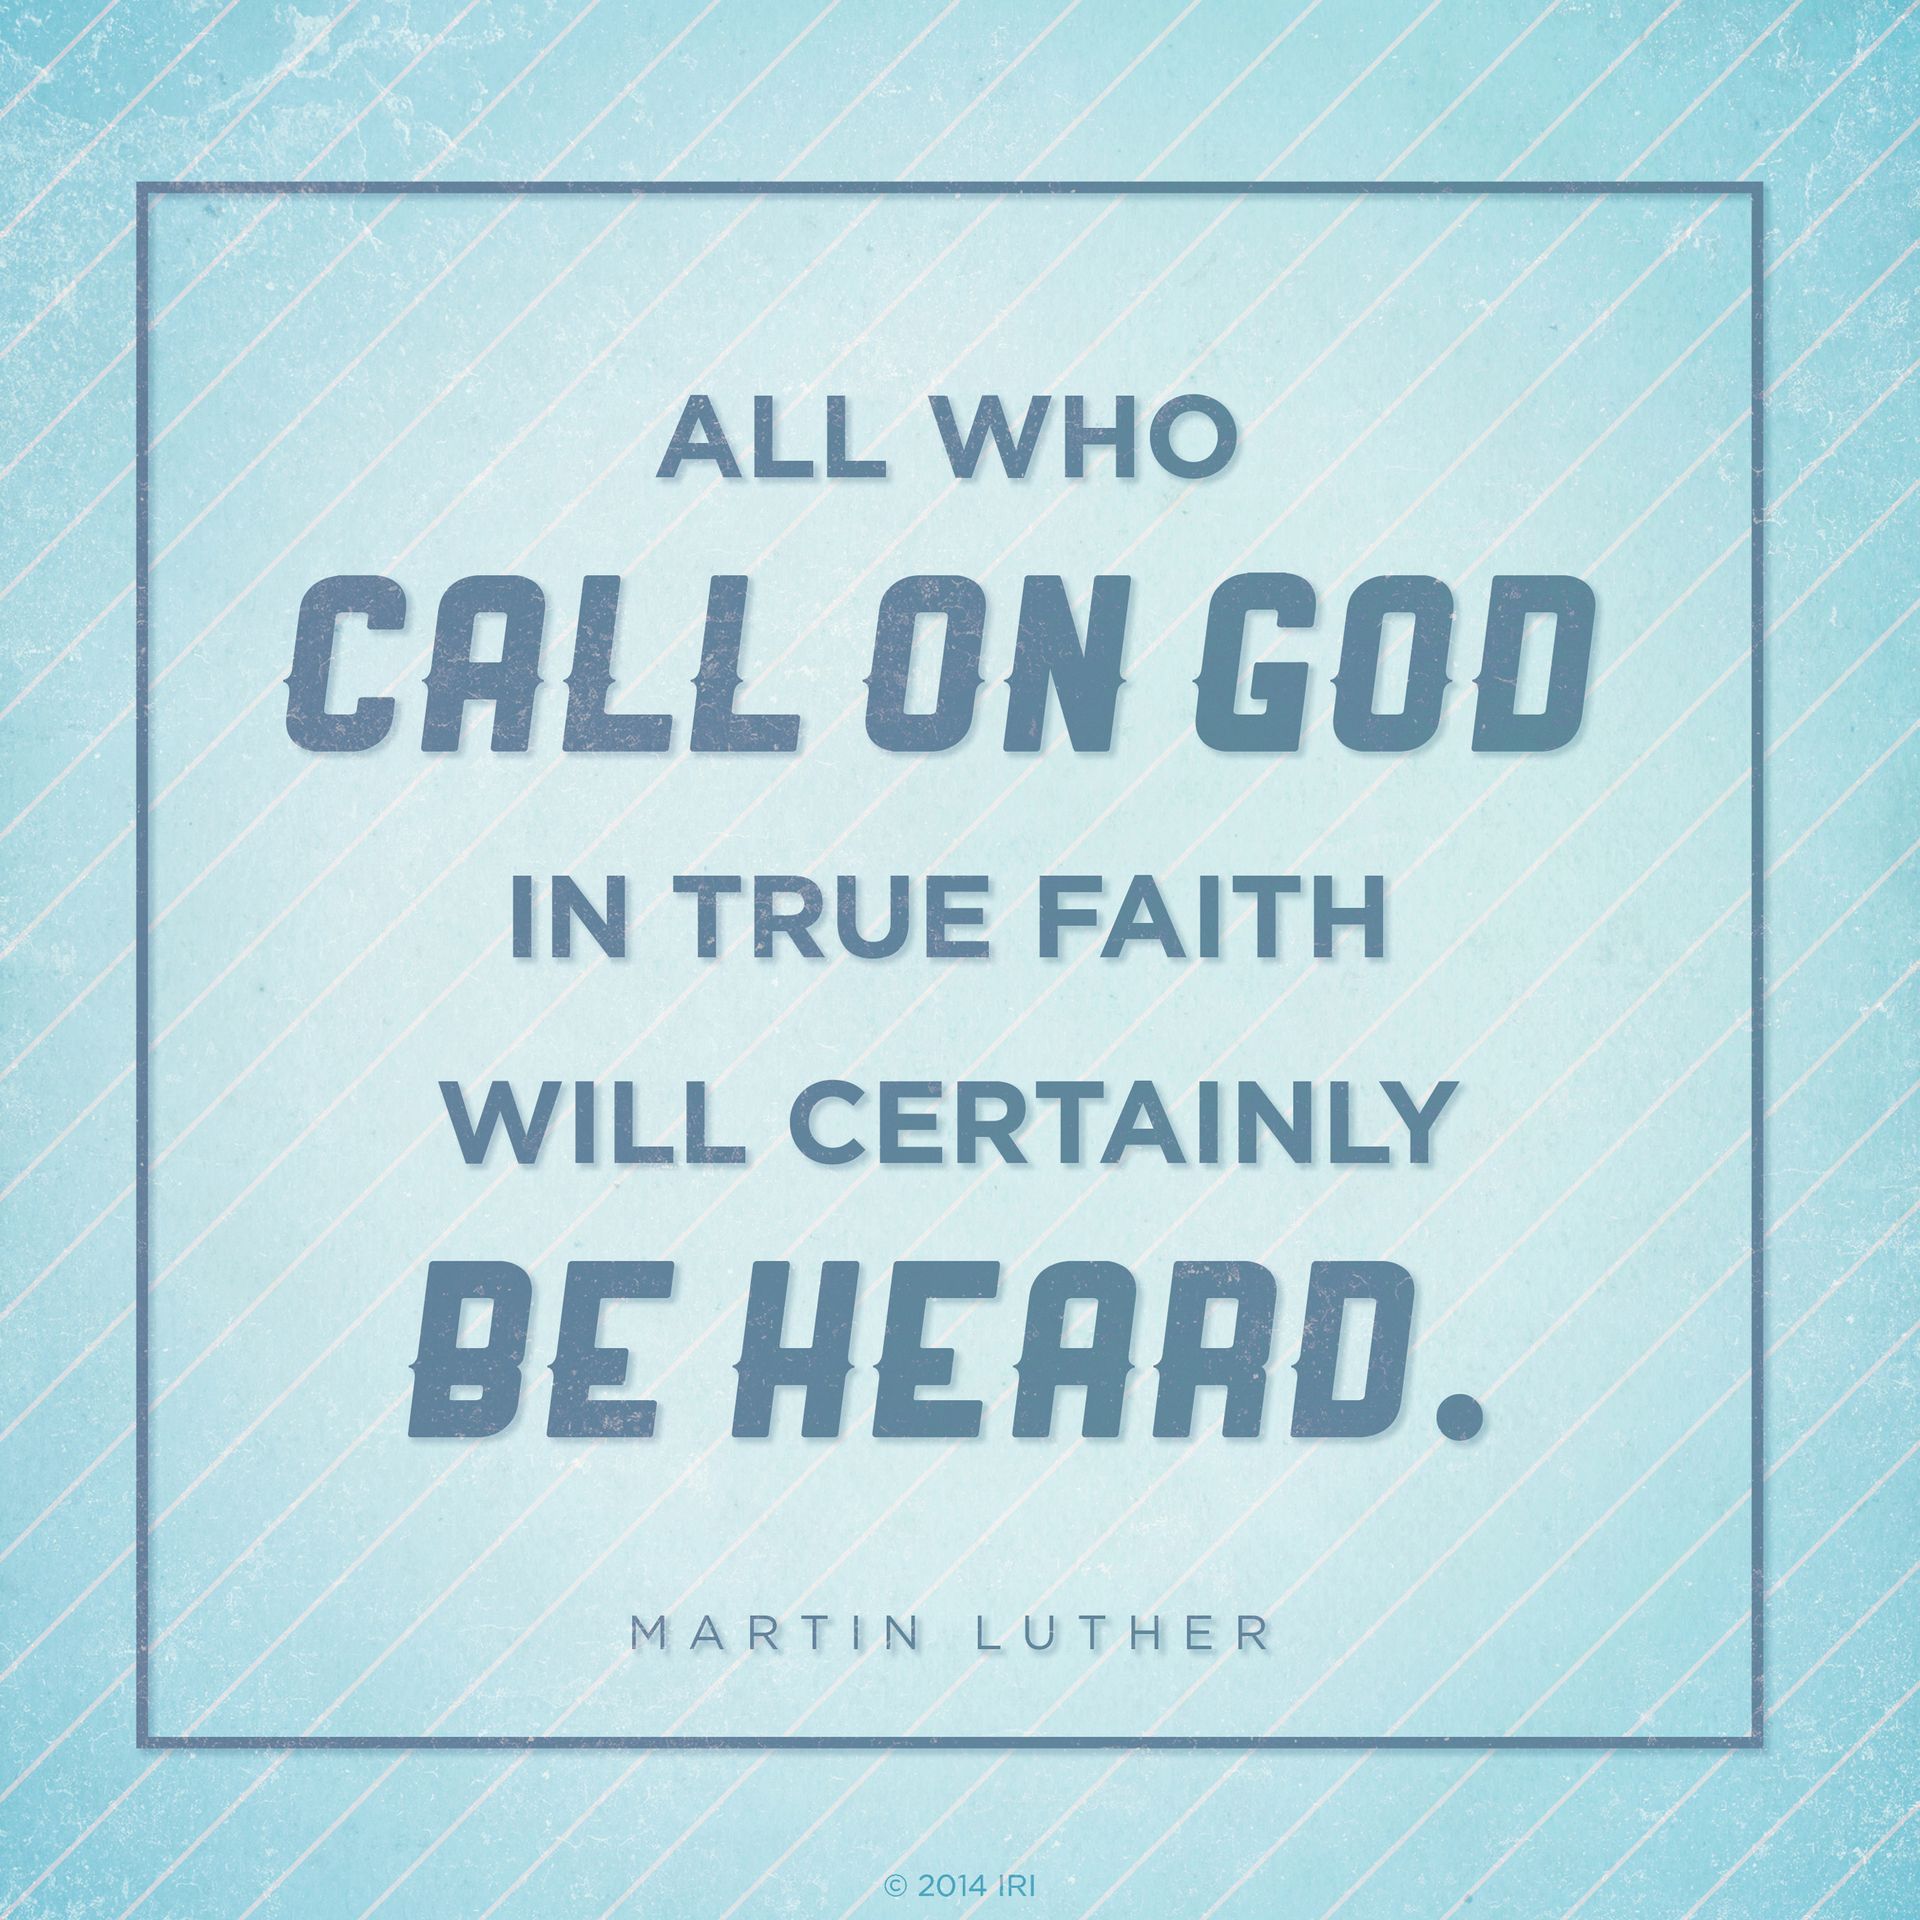 “All who call on God in true faith will certainly be heard.”—Martin Luther